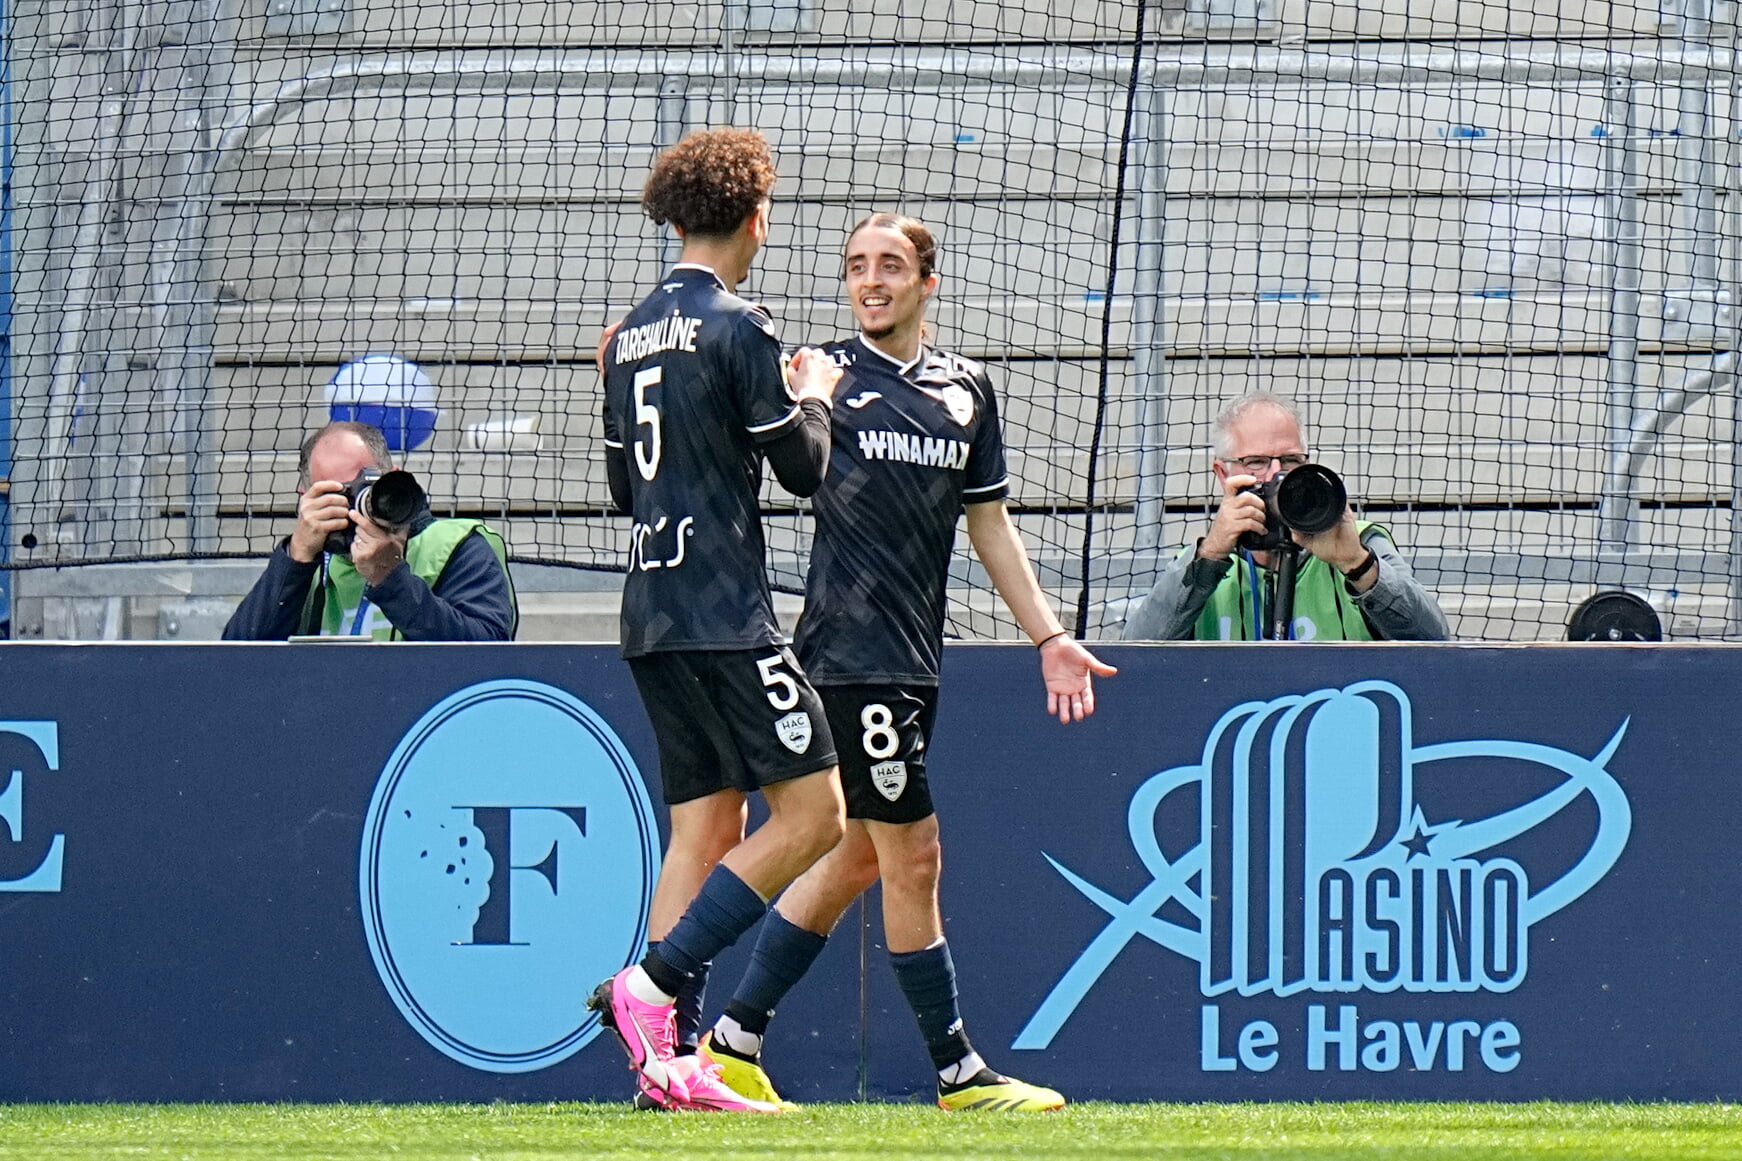 Le Havre players celebrating